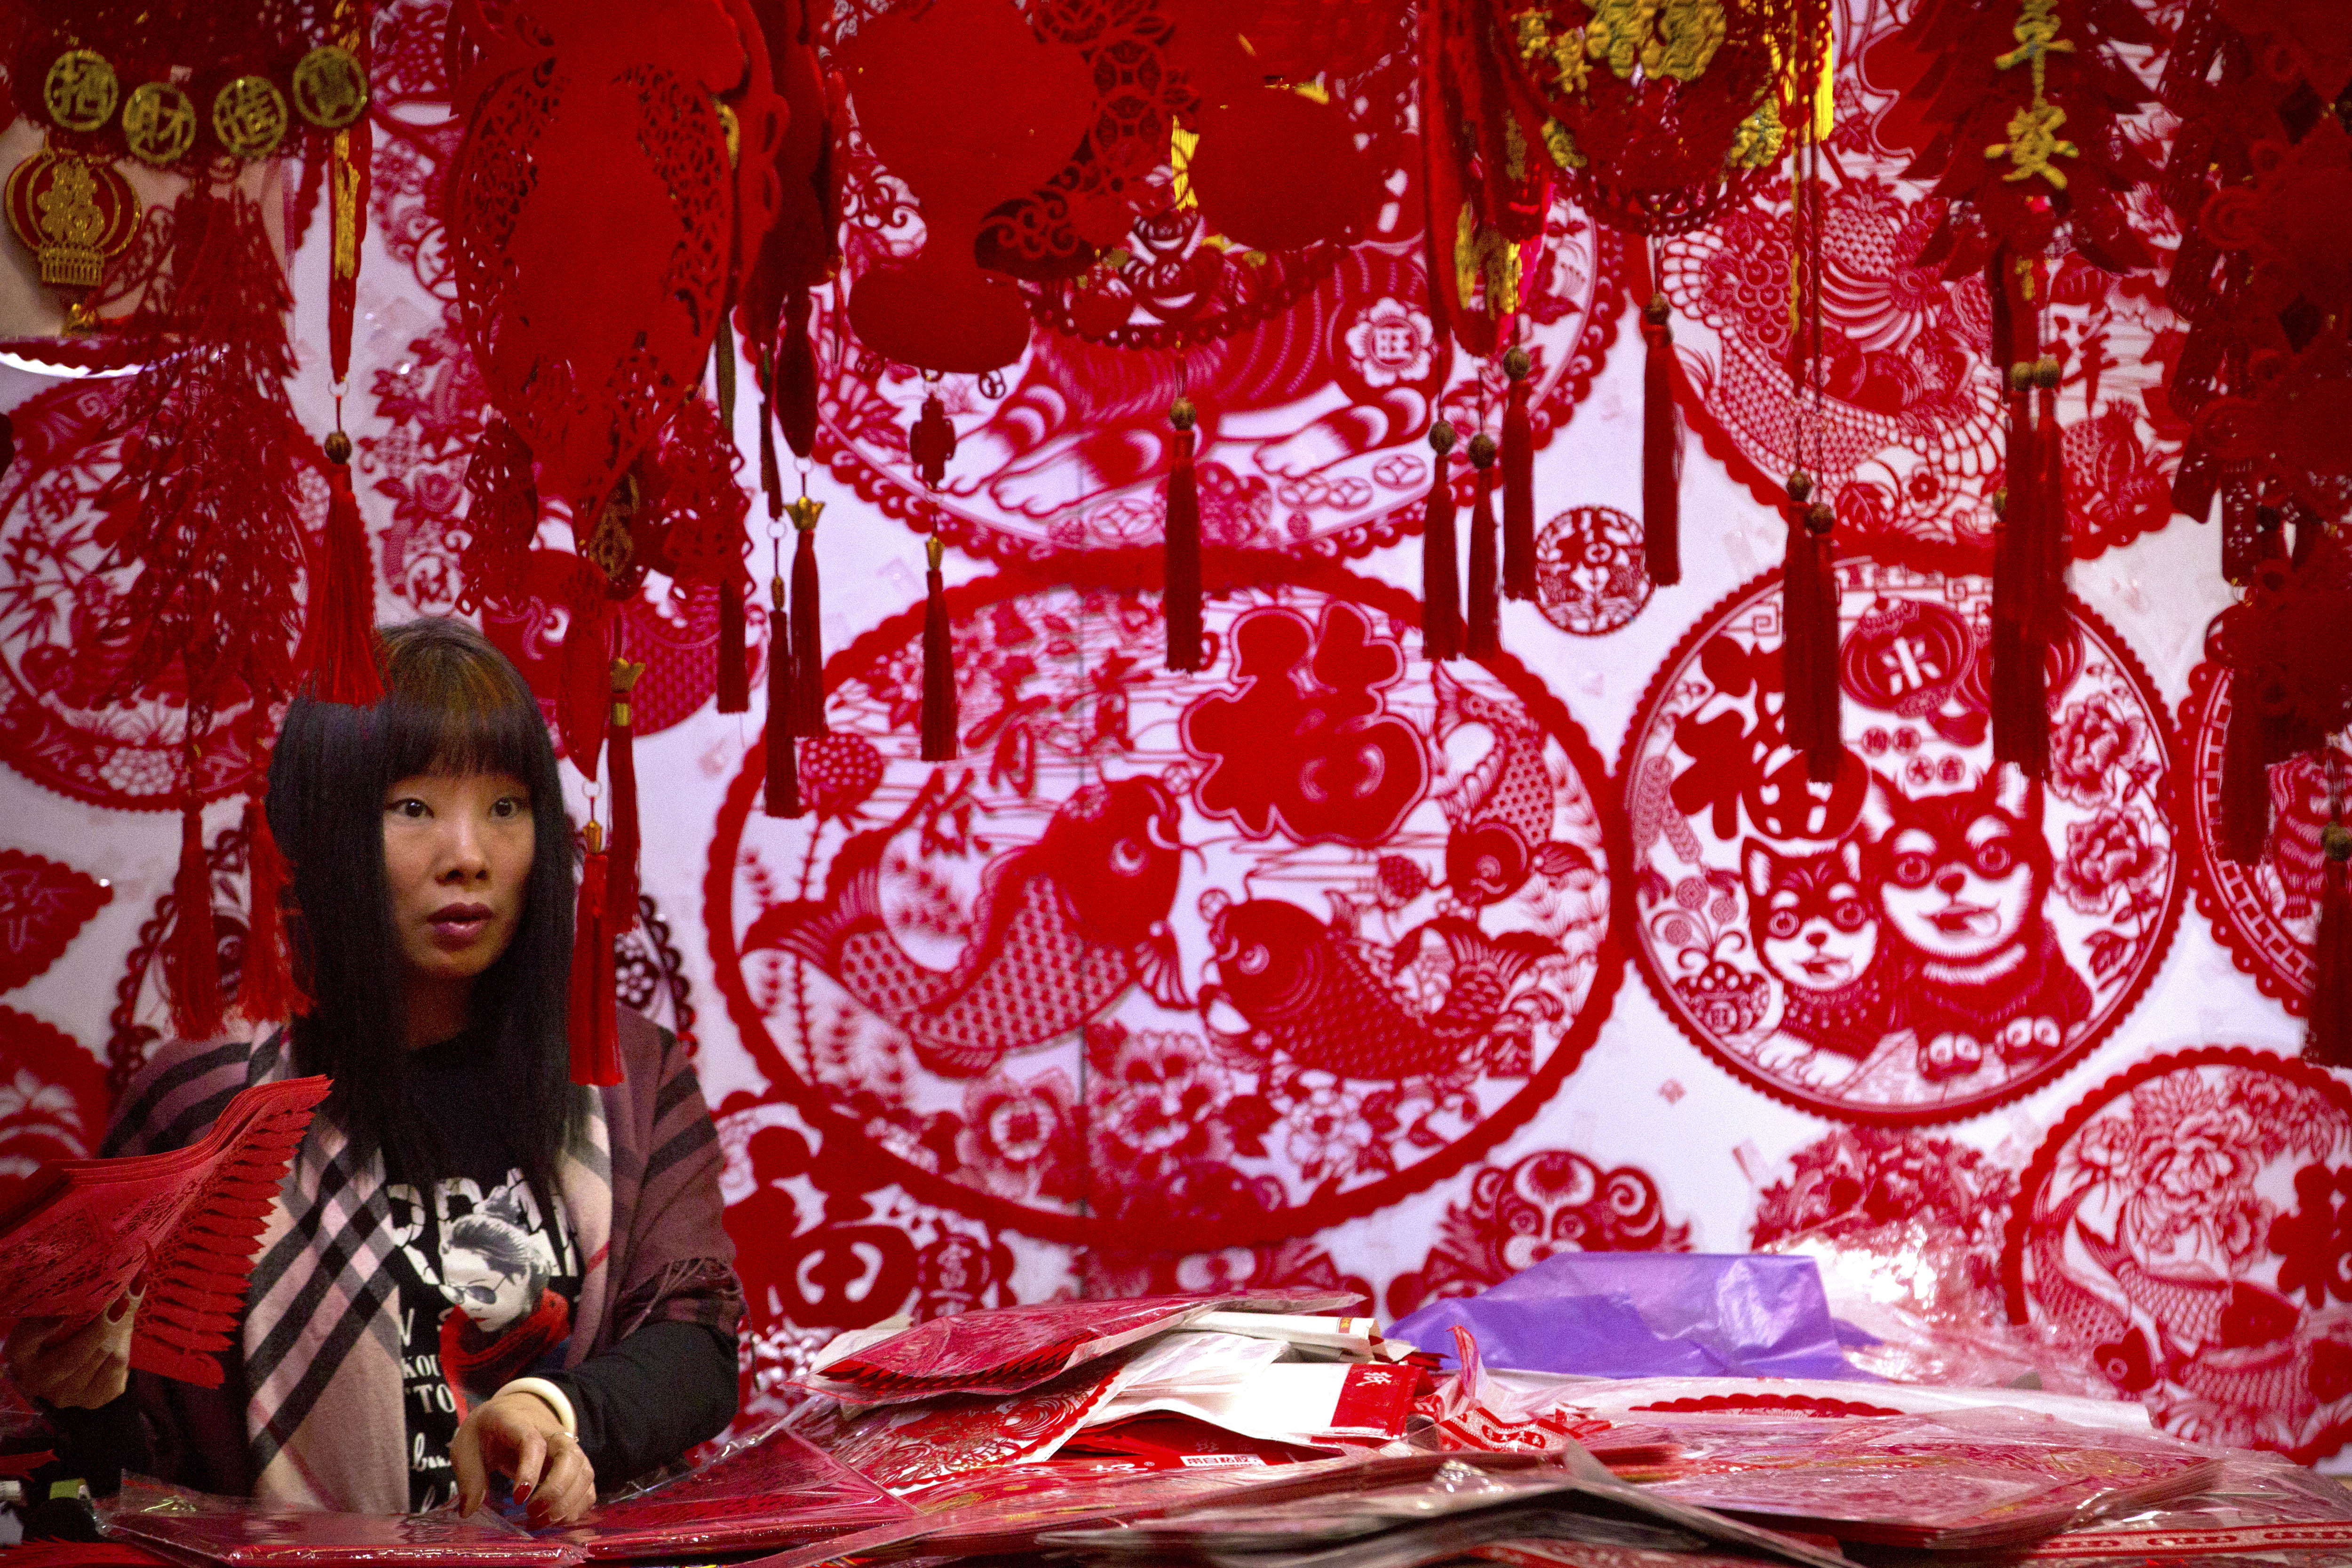 A vendor selling Lunar New Year decorations waits for customers (Mark Schiefelbein/AP)